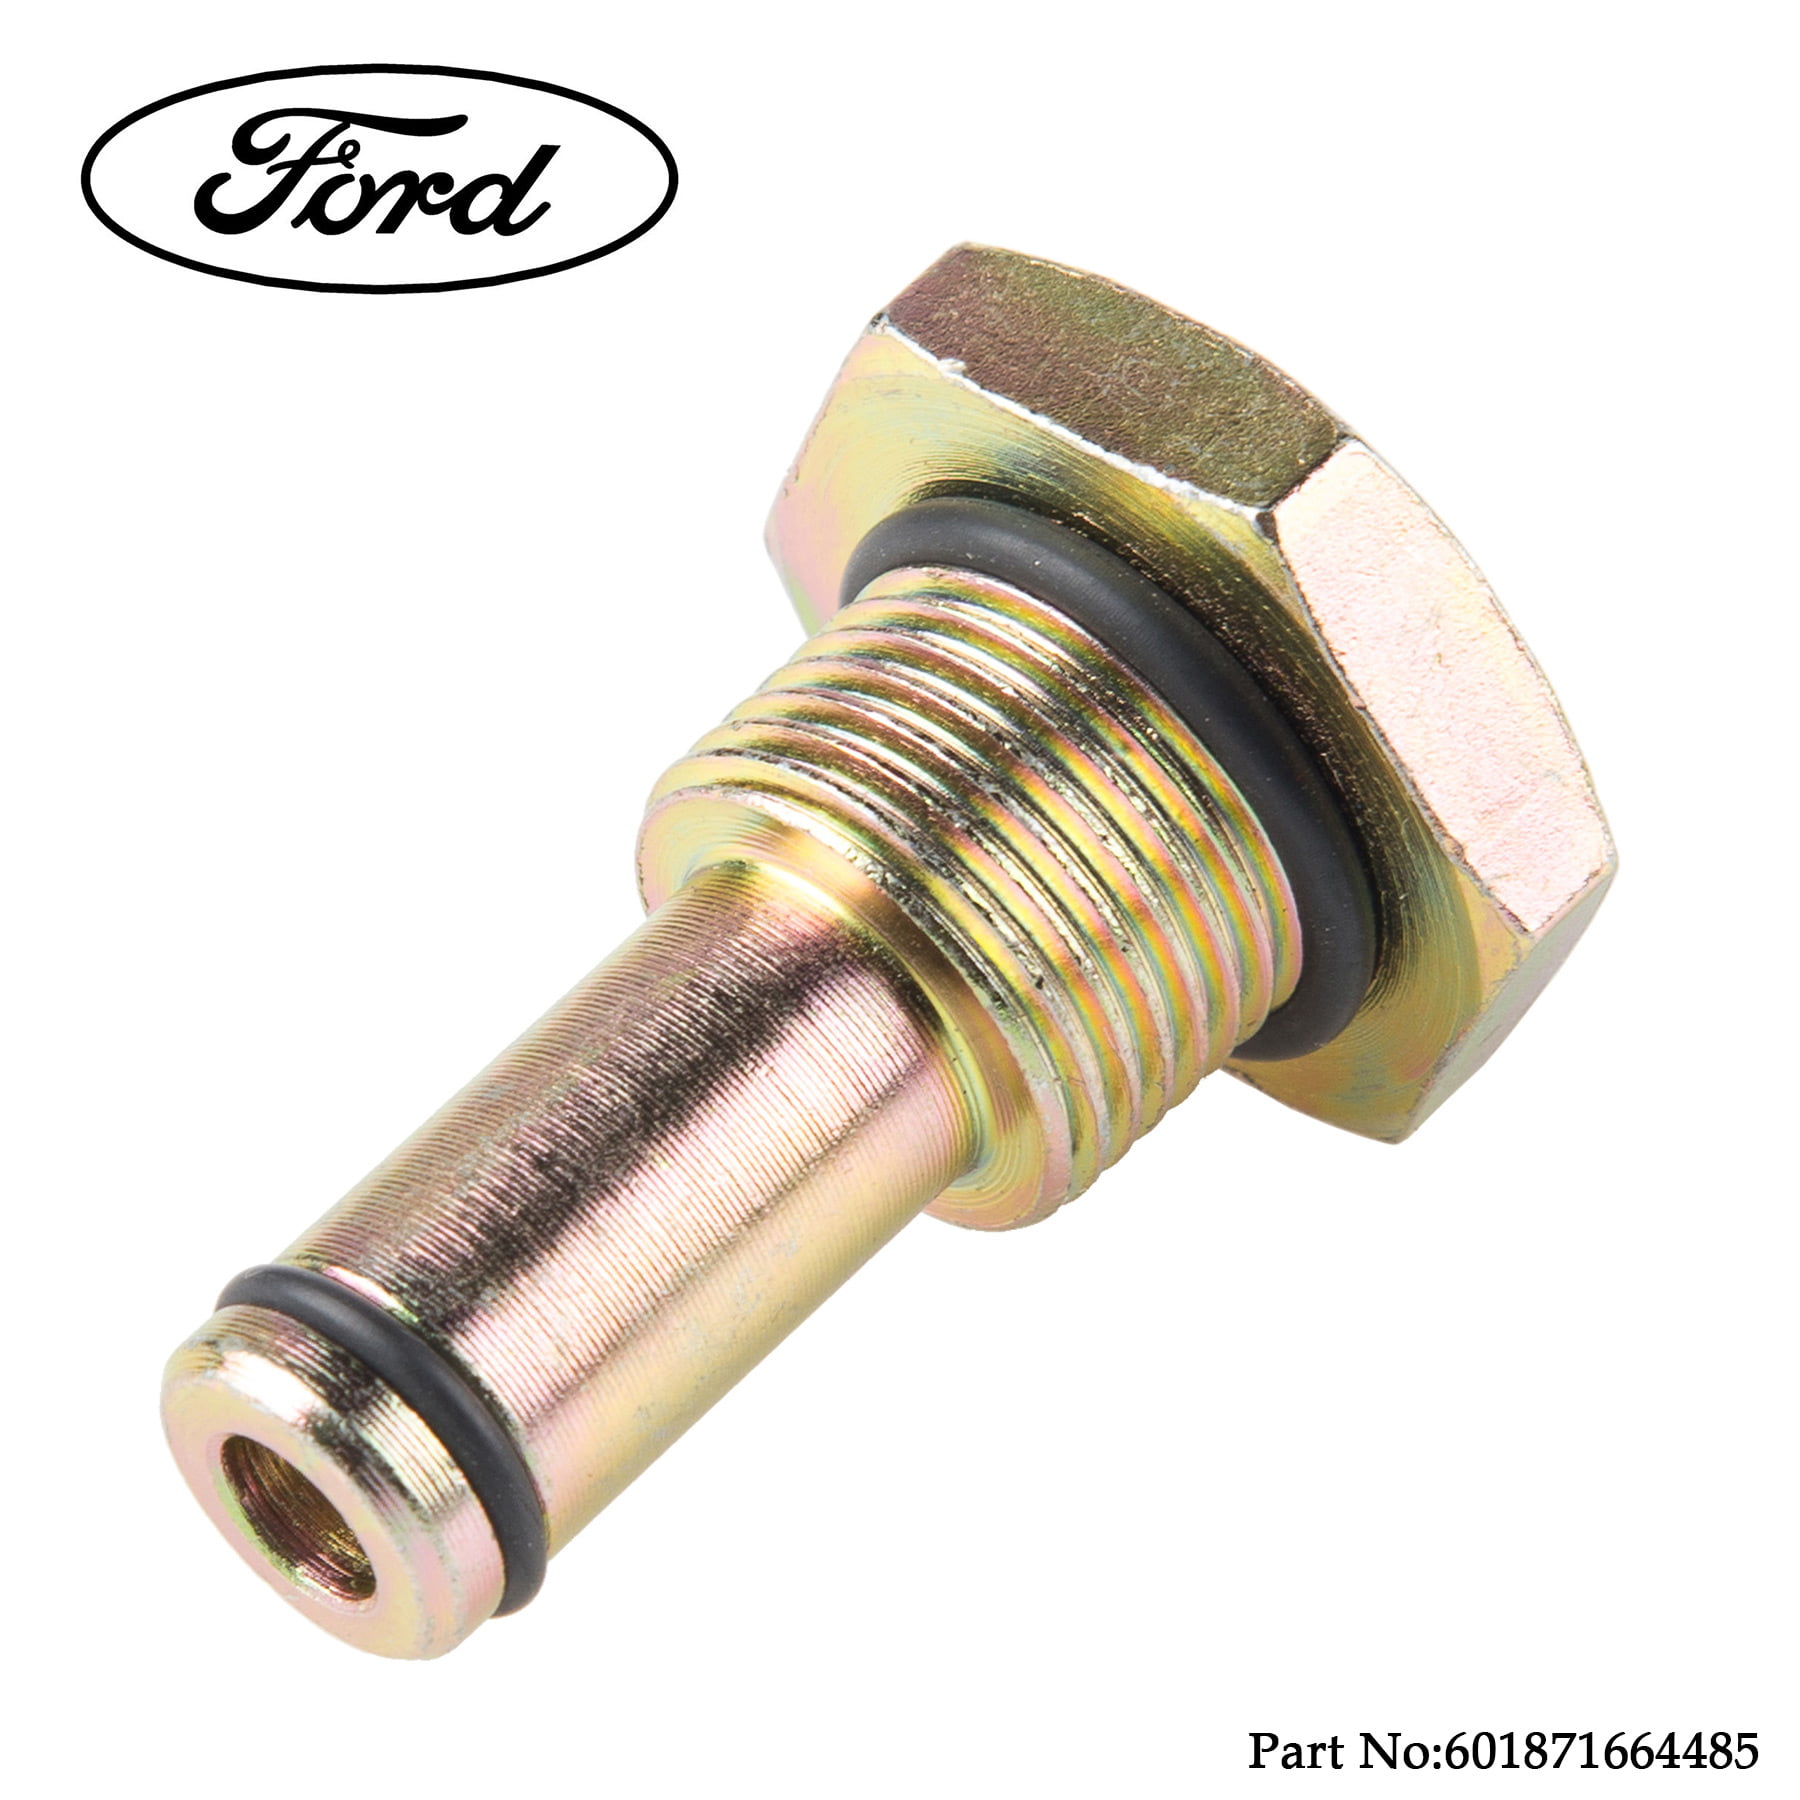 1995 7.3L Ford Powerstroke High Pressure Oil System IPR Air Test Tool